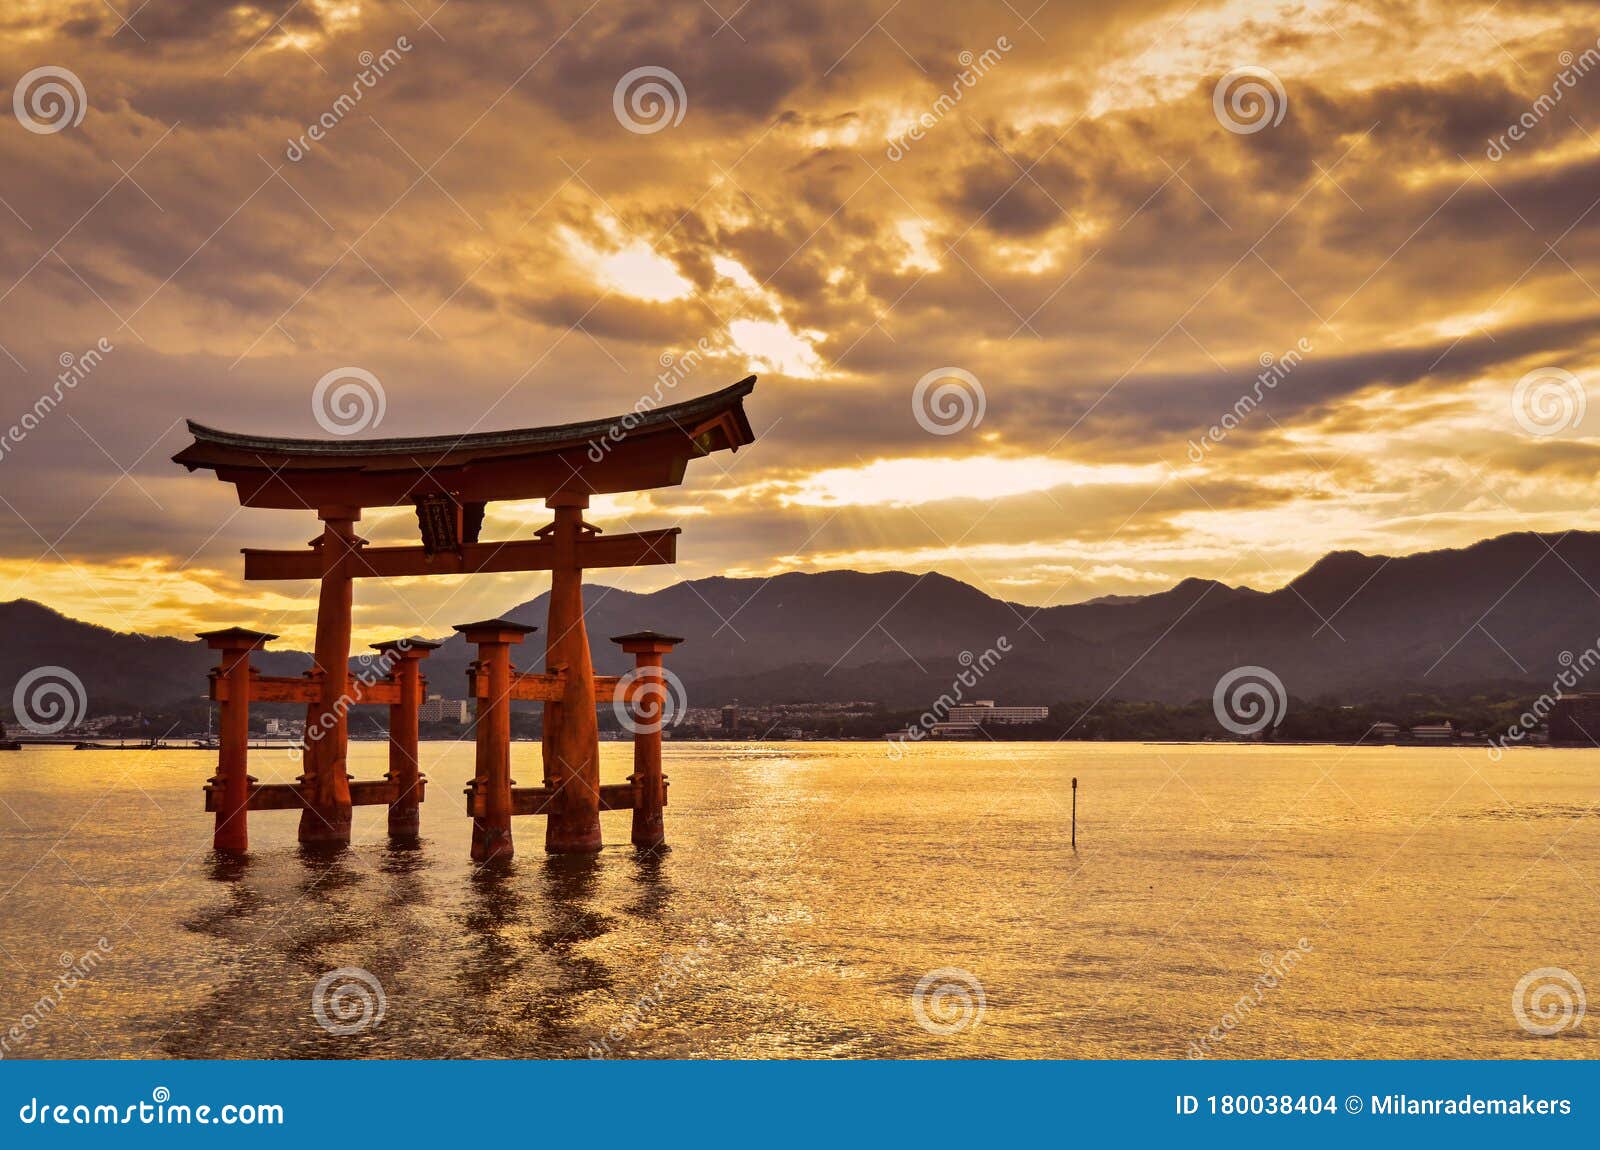 Japanese Torii Gate of Miyajima Standing in the Water with a Beautiful  Dramatic Sunset Over the Mountains in the Background. Stock Photo - Image  of orange, japan: 180038404